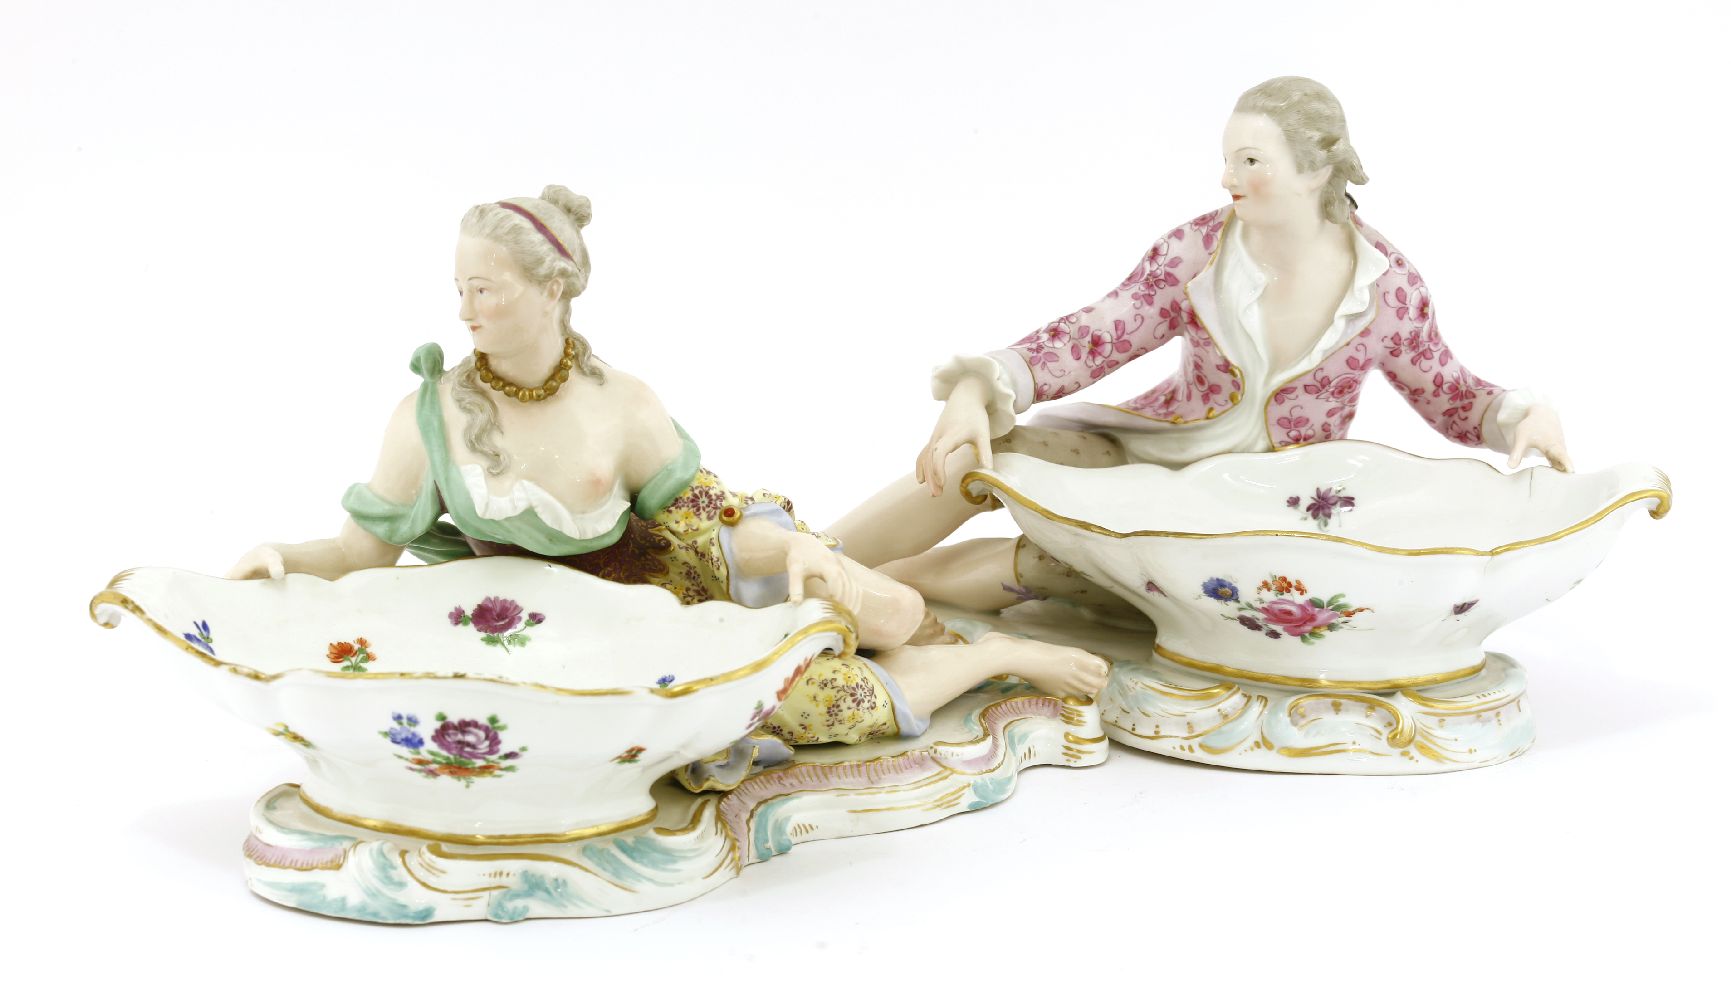 A near pair of Meissen porcelain figural salts,c.1880, modelled as a lady and a gentleman, each